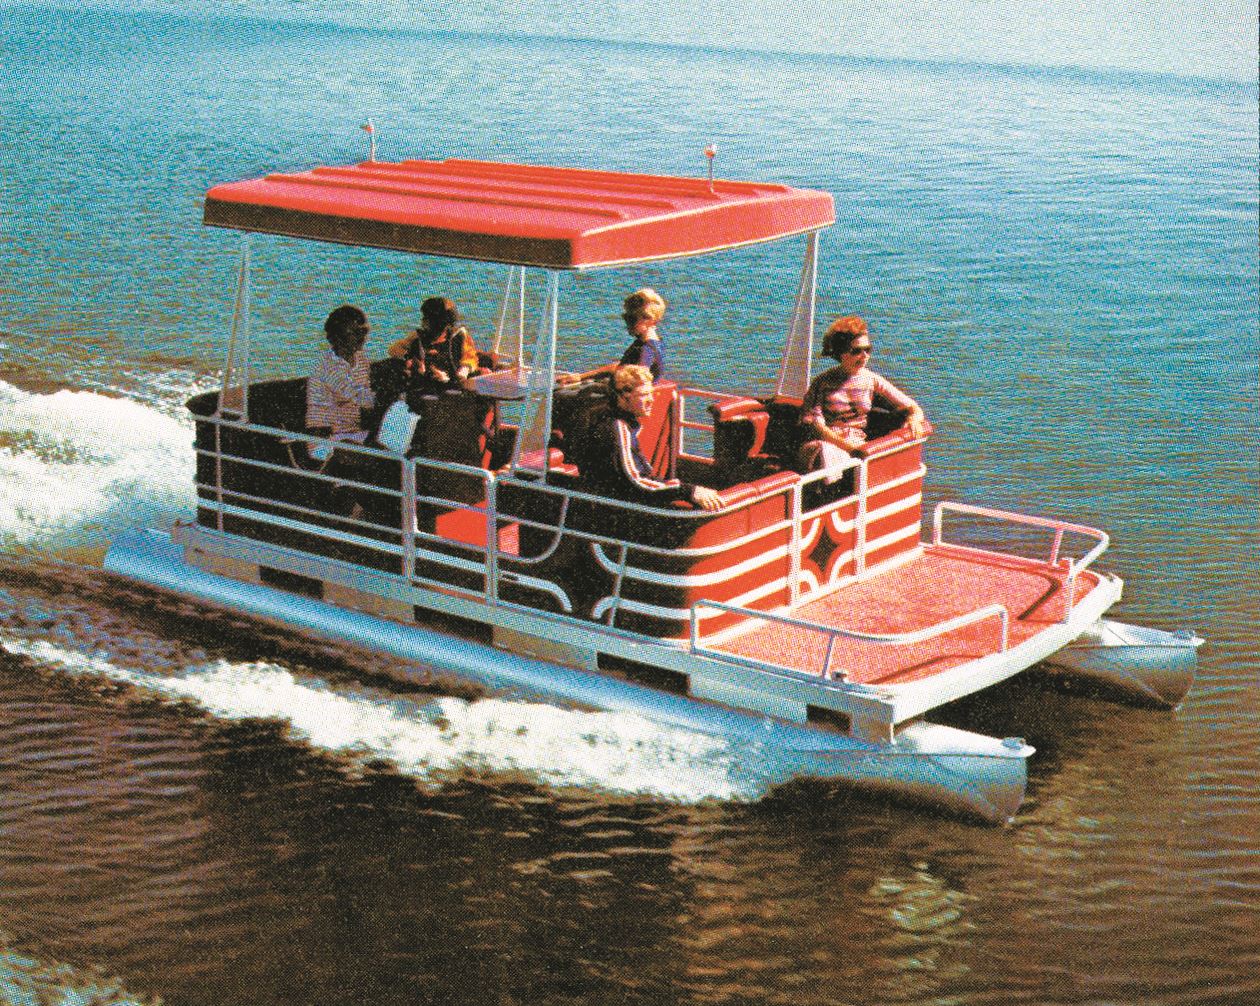 Early pontoon design with luxurious seating